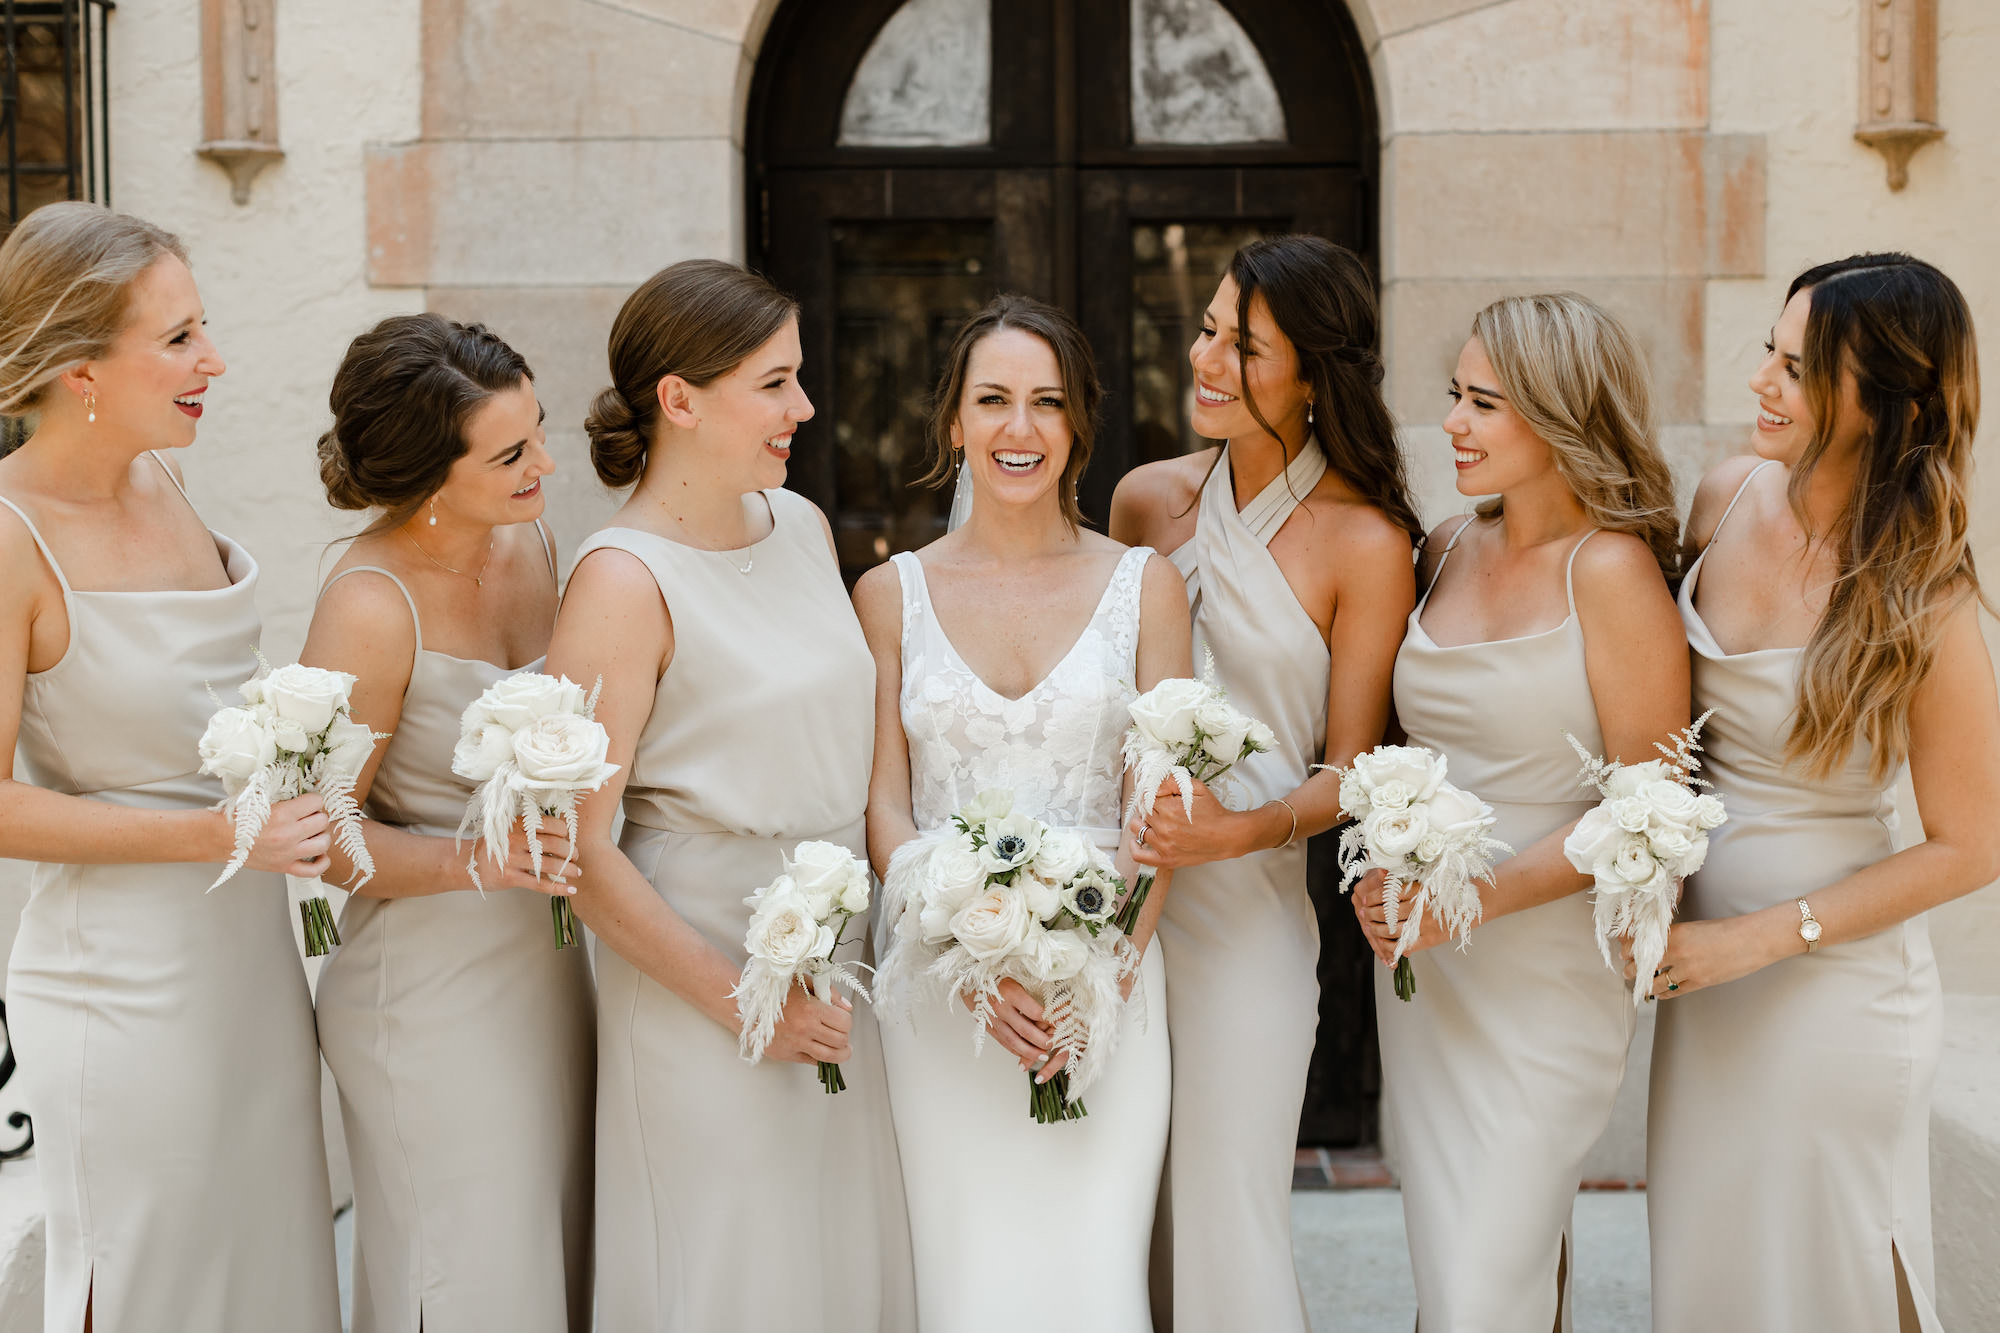 Bridal Party Wedding Portrait | Neutral Champagne Satin Mismatched Bridesmaids Gowns | White Fern, Feathers, and Rose Bouquet Inspiration | Sarasota Bride and Groom Window Portrait | Historic Sarasota Wedding Venue Powel Crosley Estate | Photographer Garry and Stacy Photography Co.